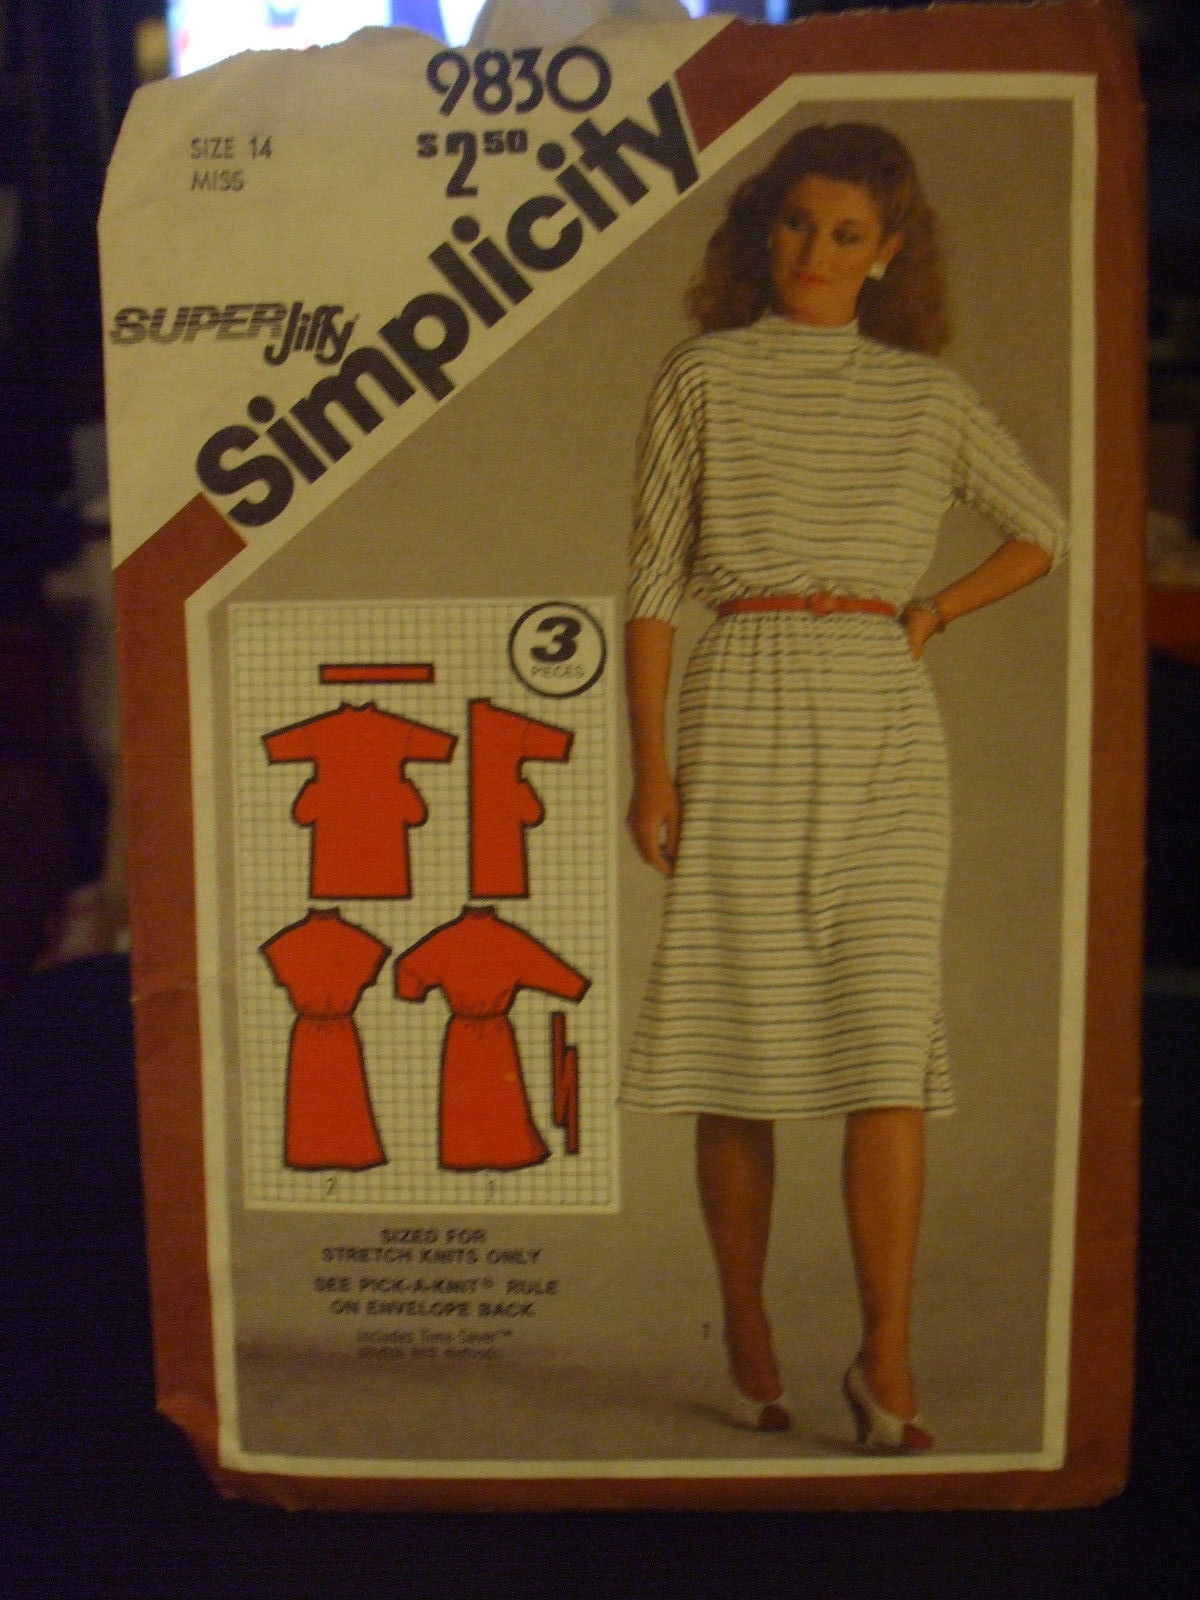 Simplicity 9830 Misses Super Jiffy Pullover Dress Pattern - Size 14 Bust 36 - $15.00